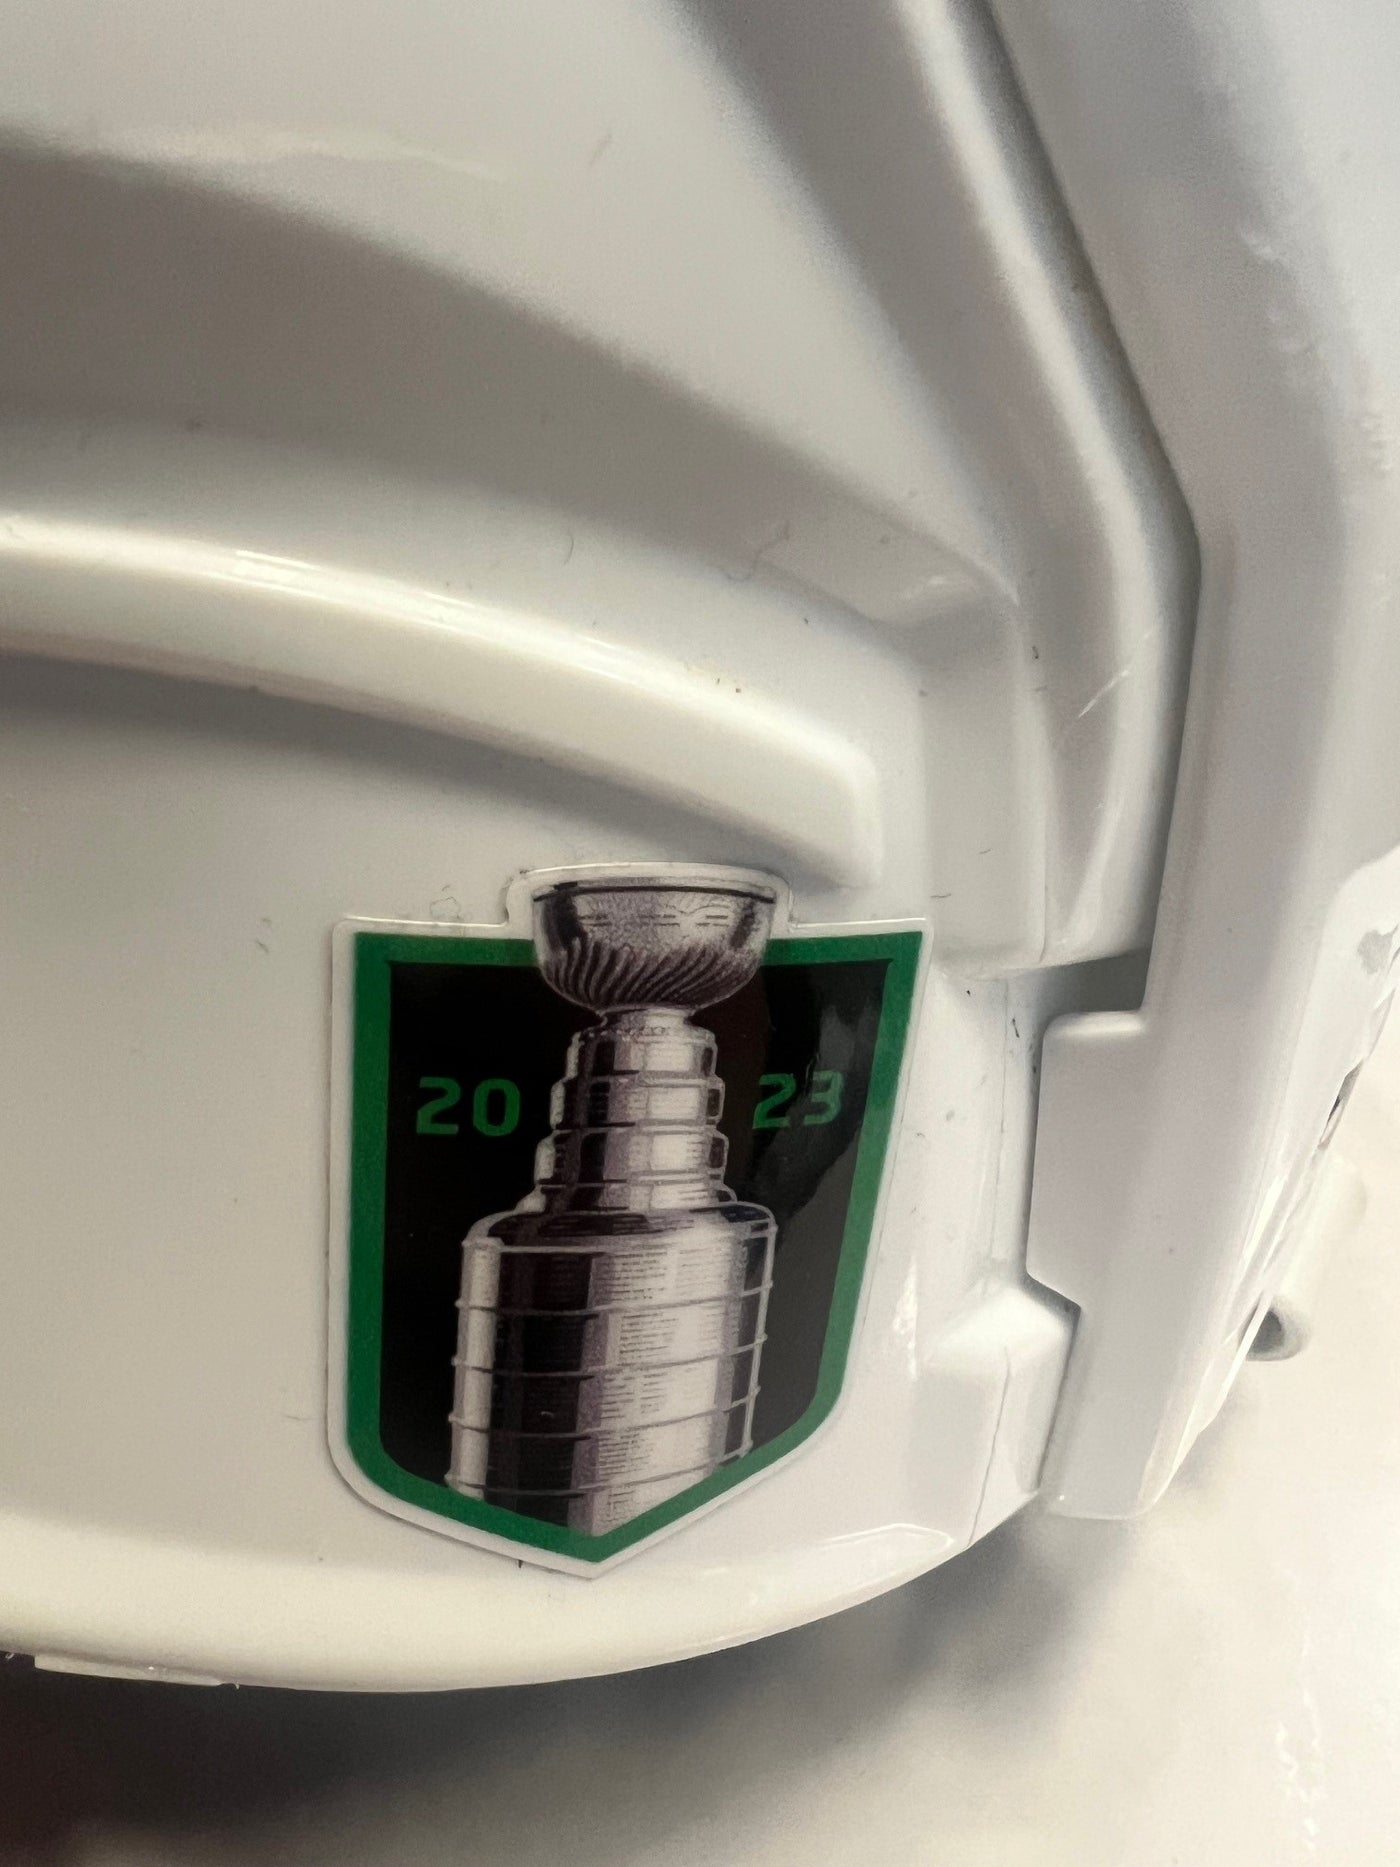 PHOTO OF STANLEY CUP PLAYOFF STICKER